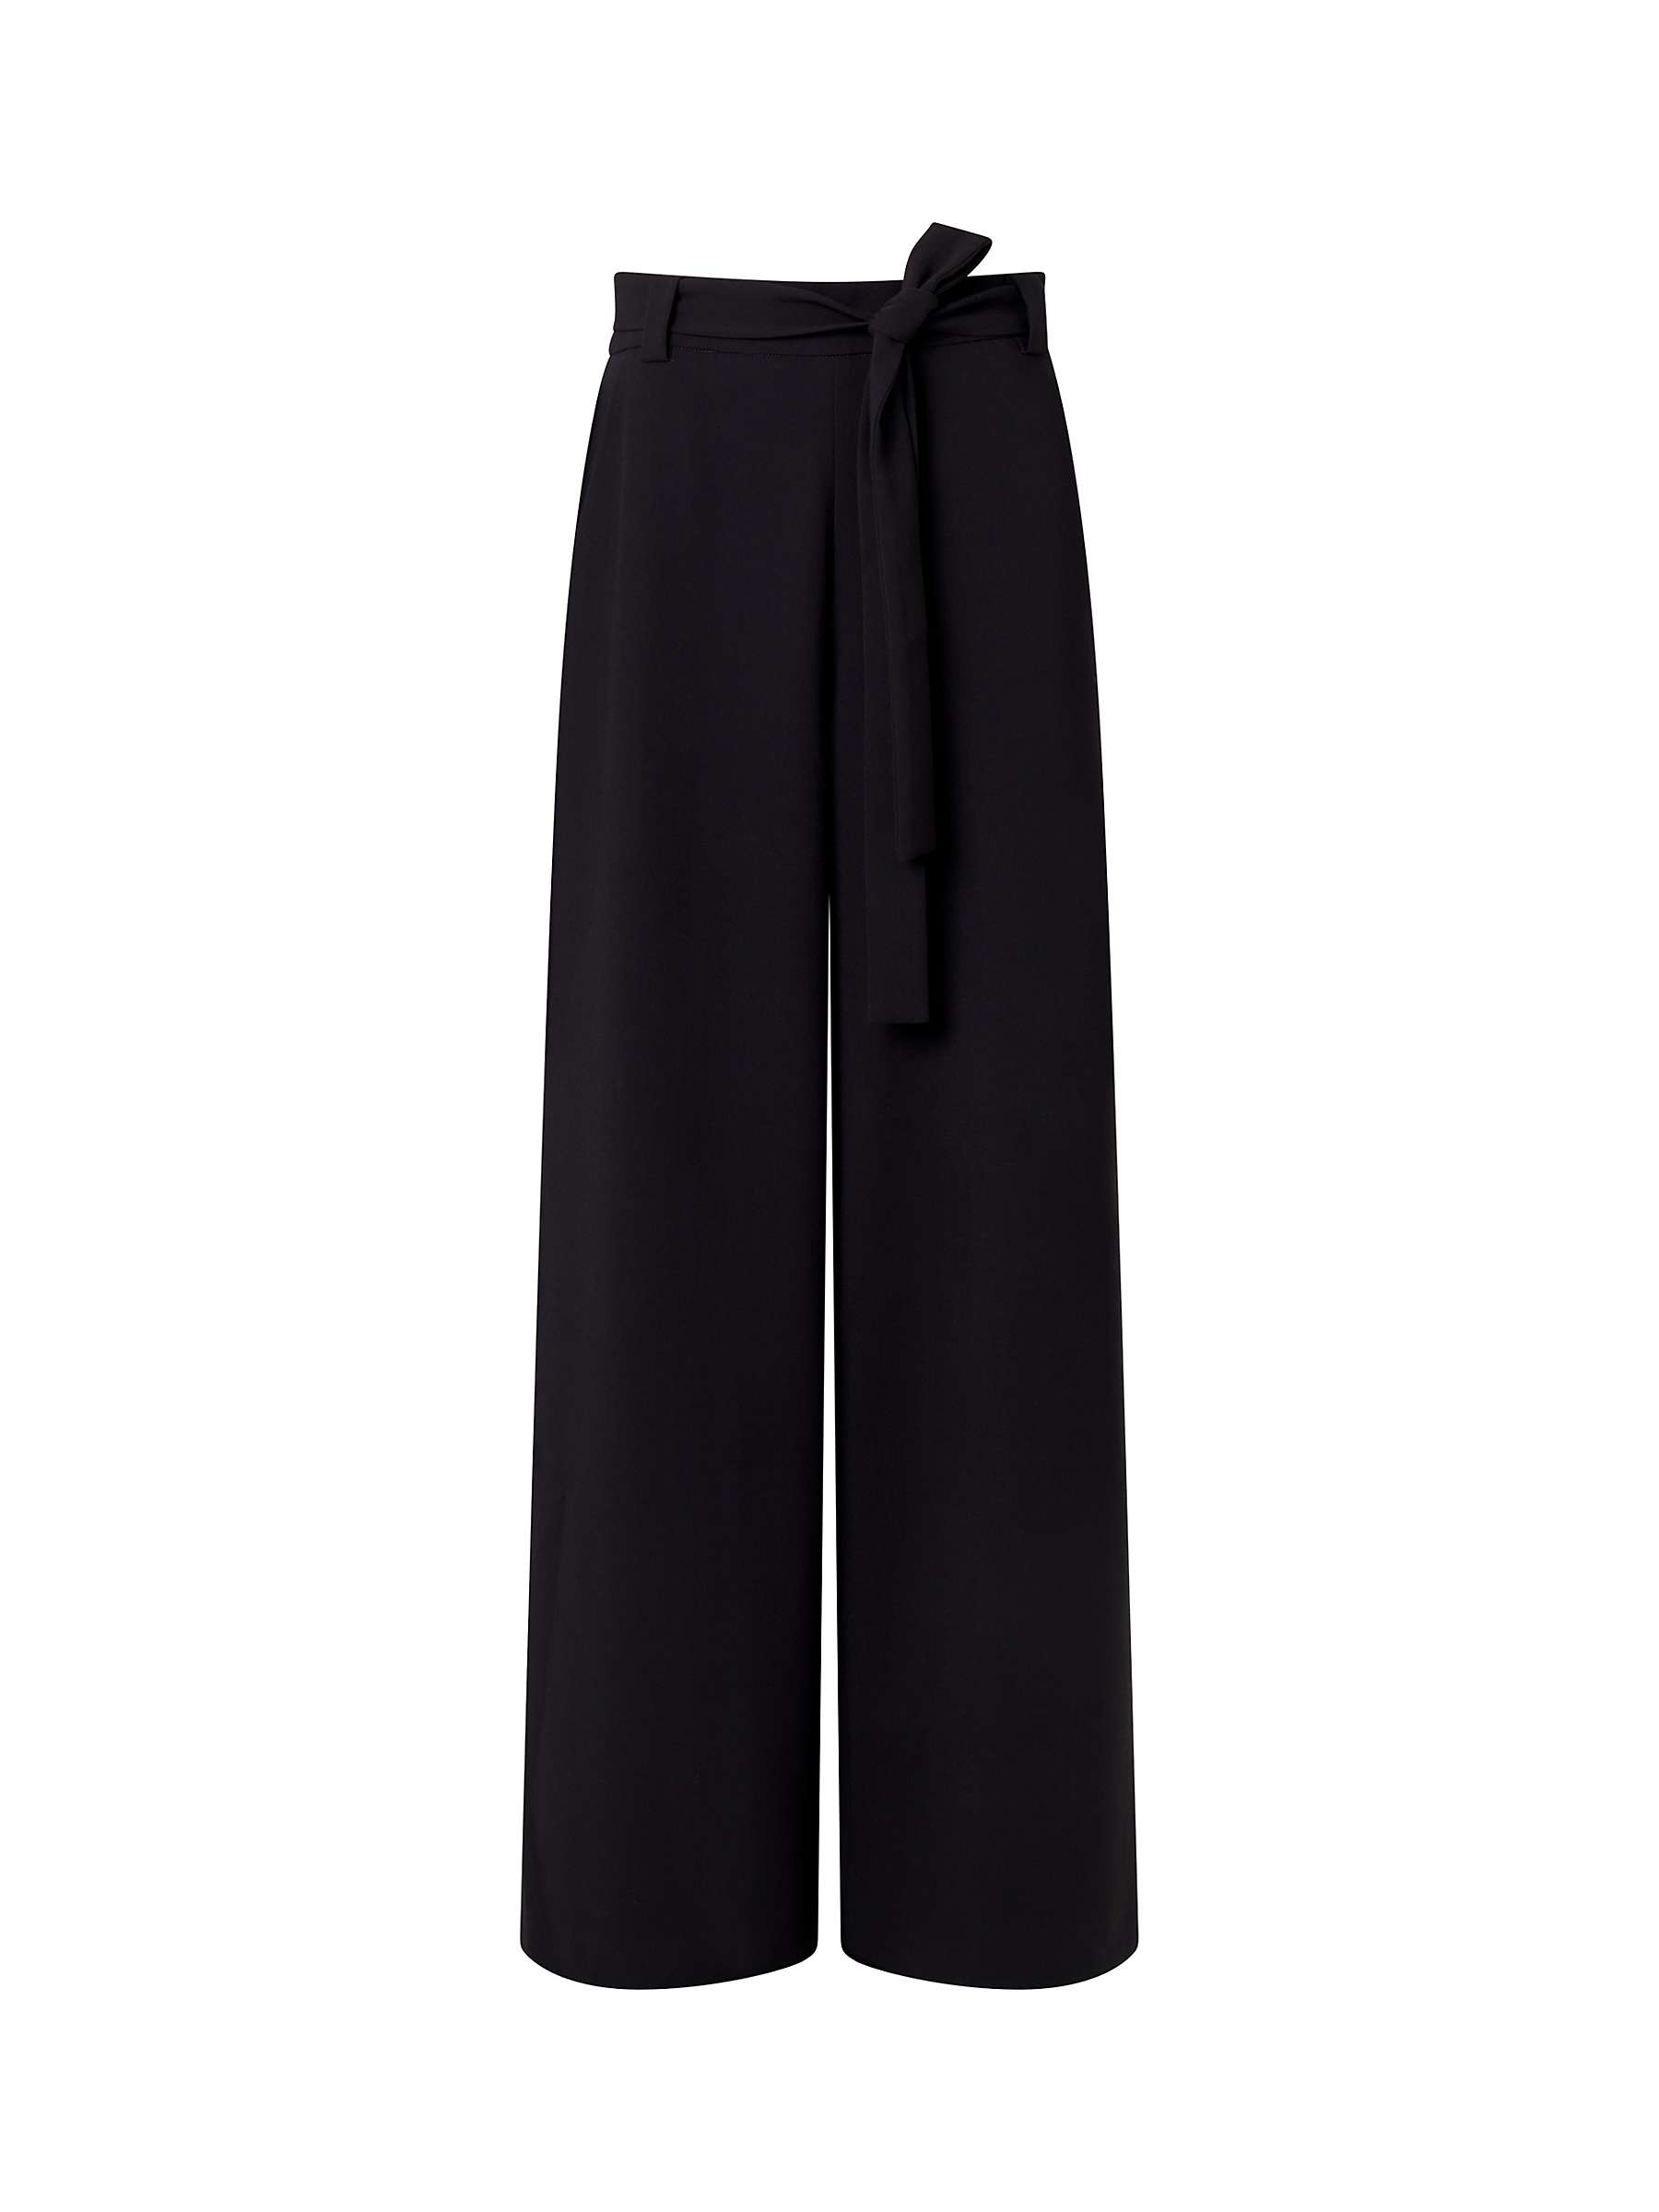 Buy French Connection Wisper Full Length Palazzo Trousers, Black Online at johnlewis.com